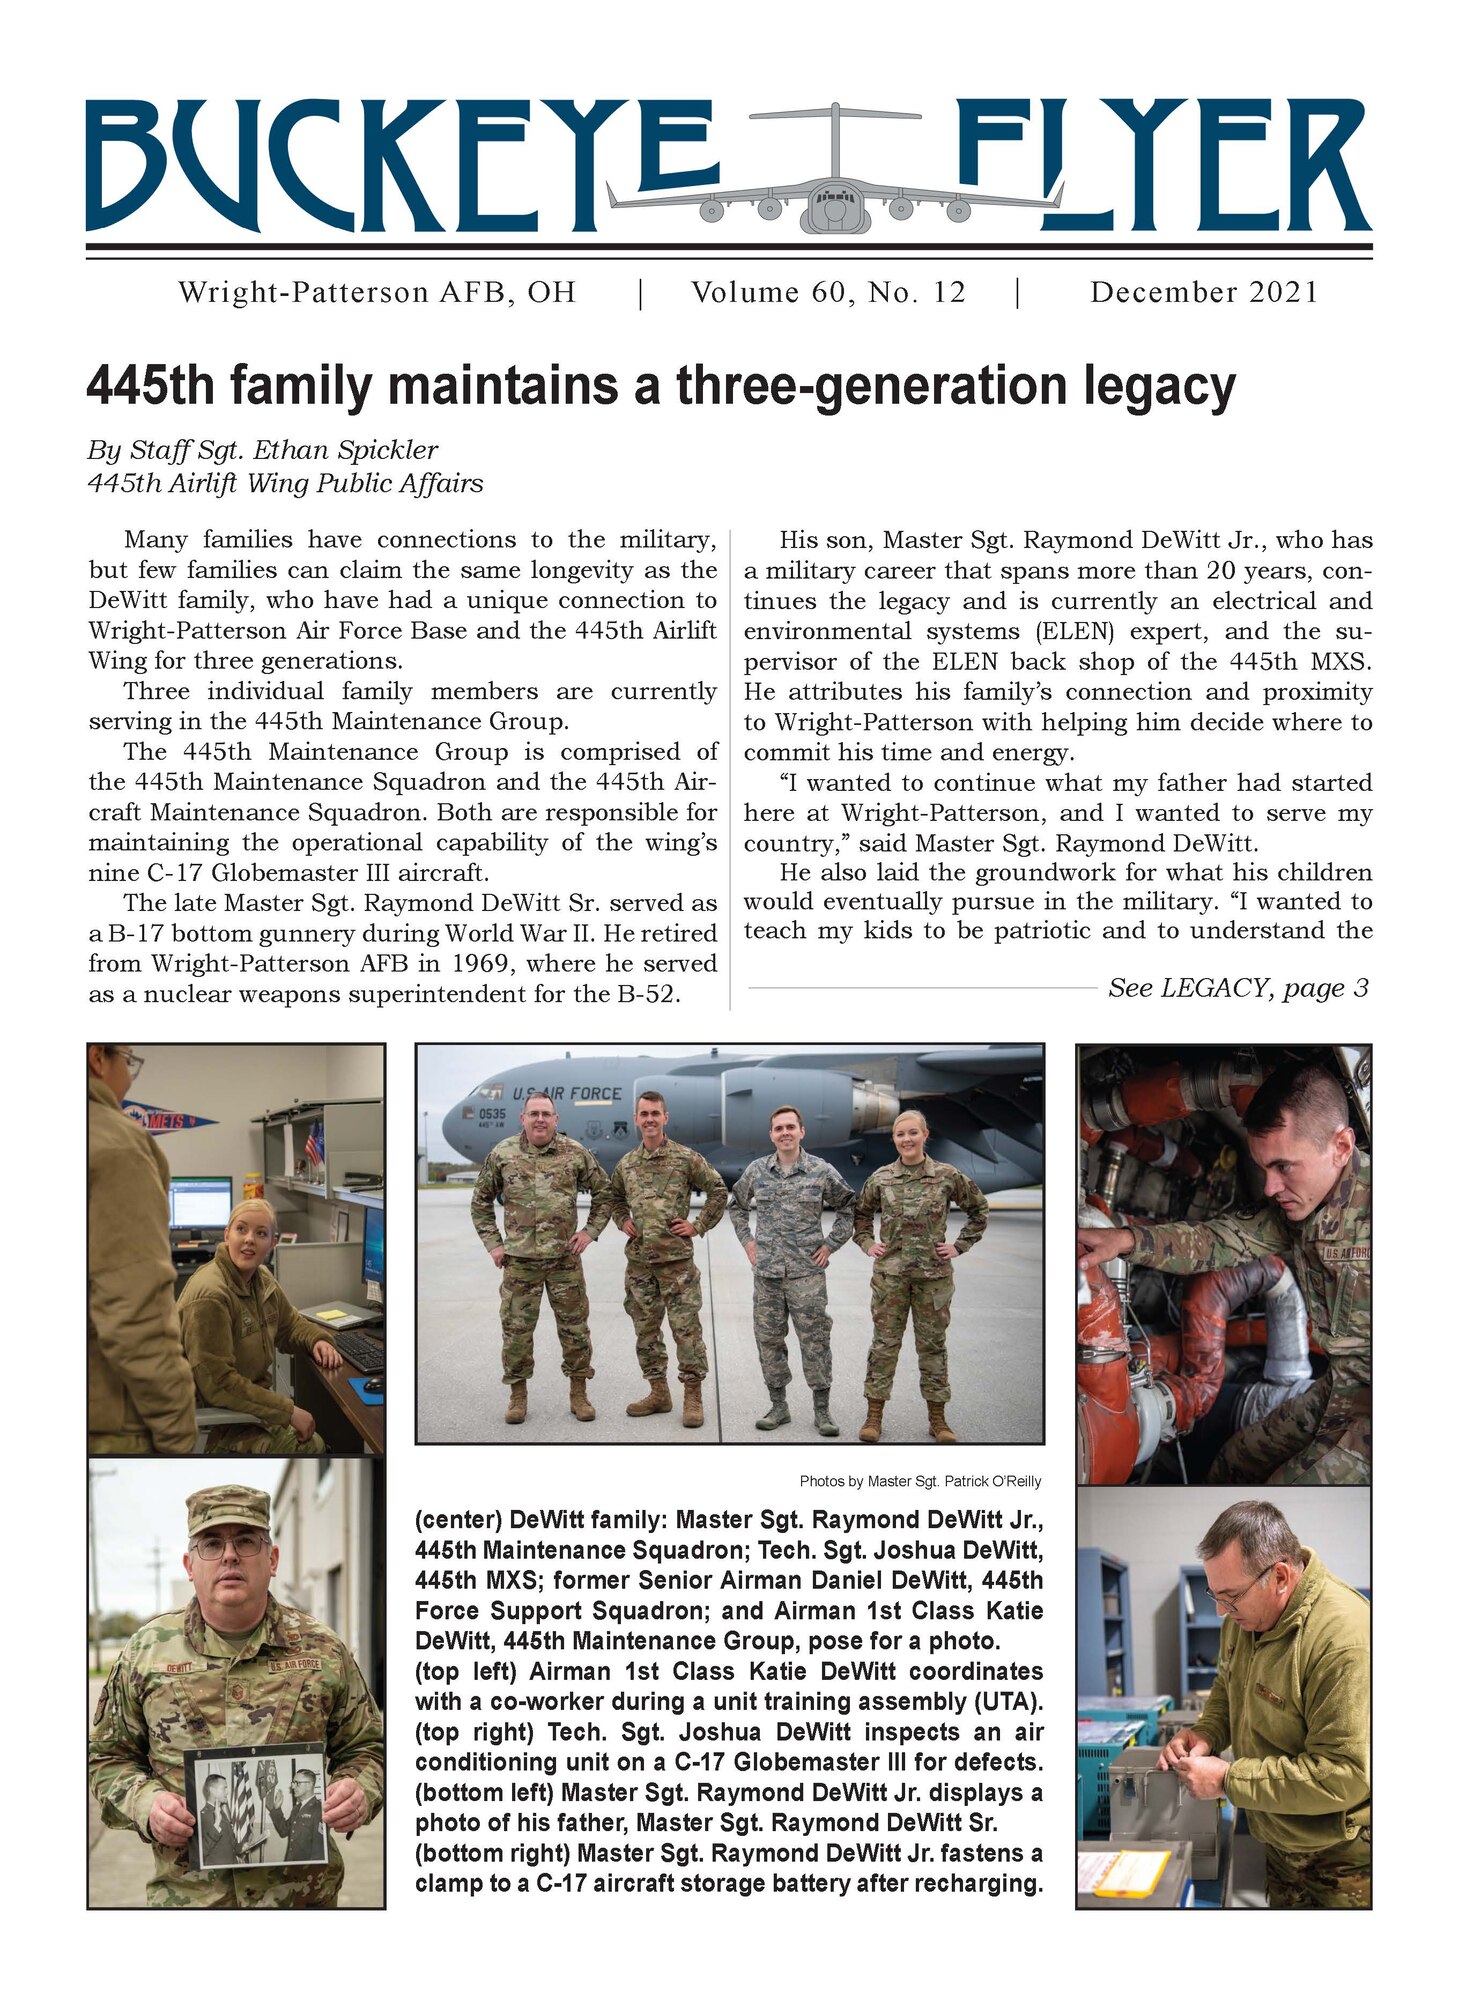 The December 2021 issue of the Buckeye Flyer is now available. The official publication of the 445th Airlift Wing includes eight pages of stories, photos and features pertaining to the 445th Airlift Wing, Air Force Reserve Command and the U.S. Air Force.